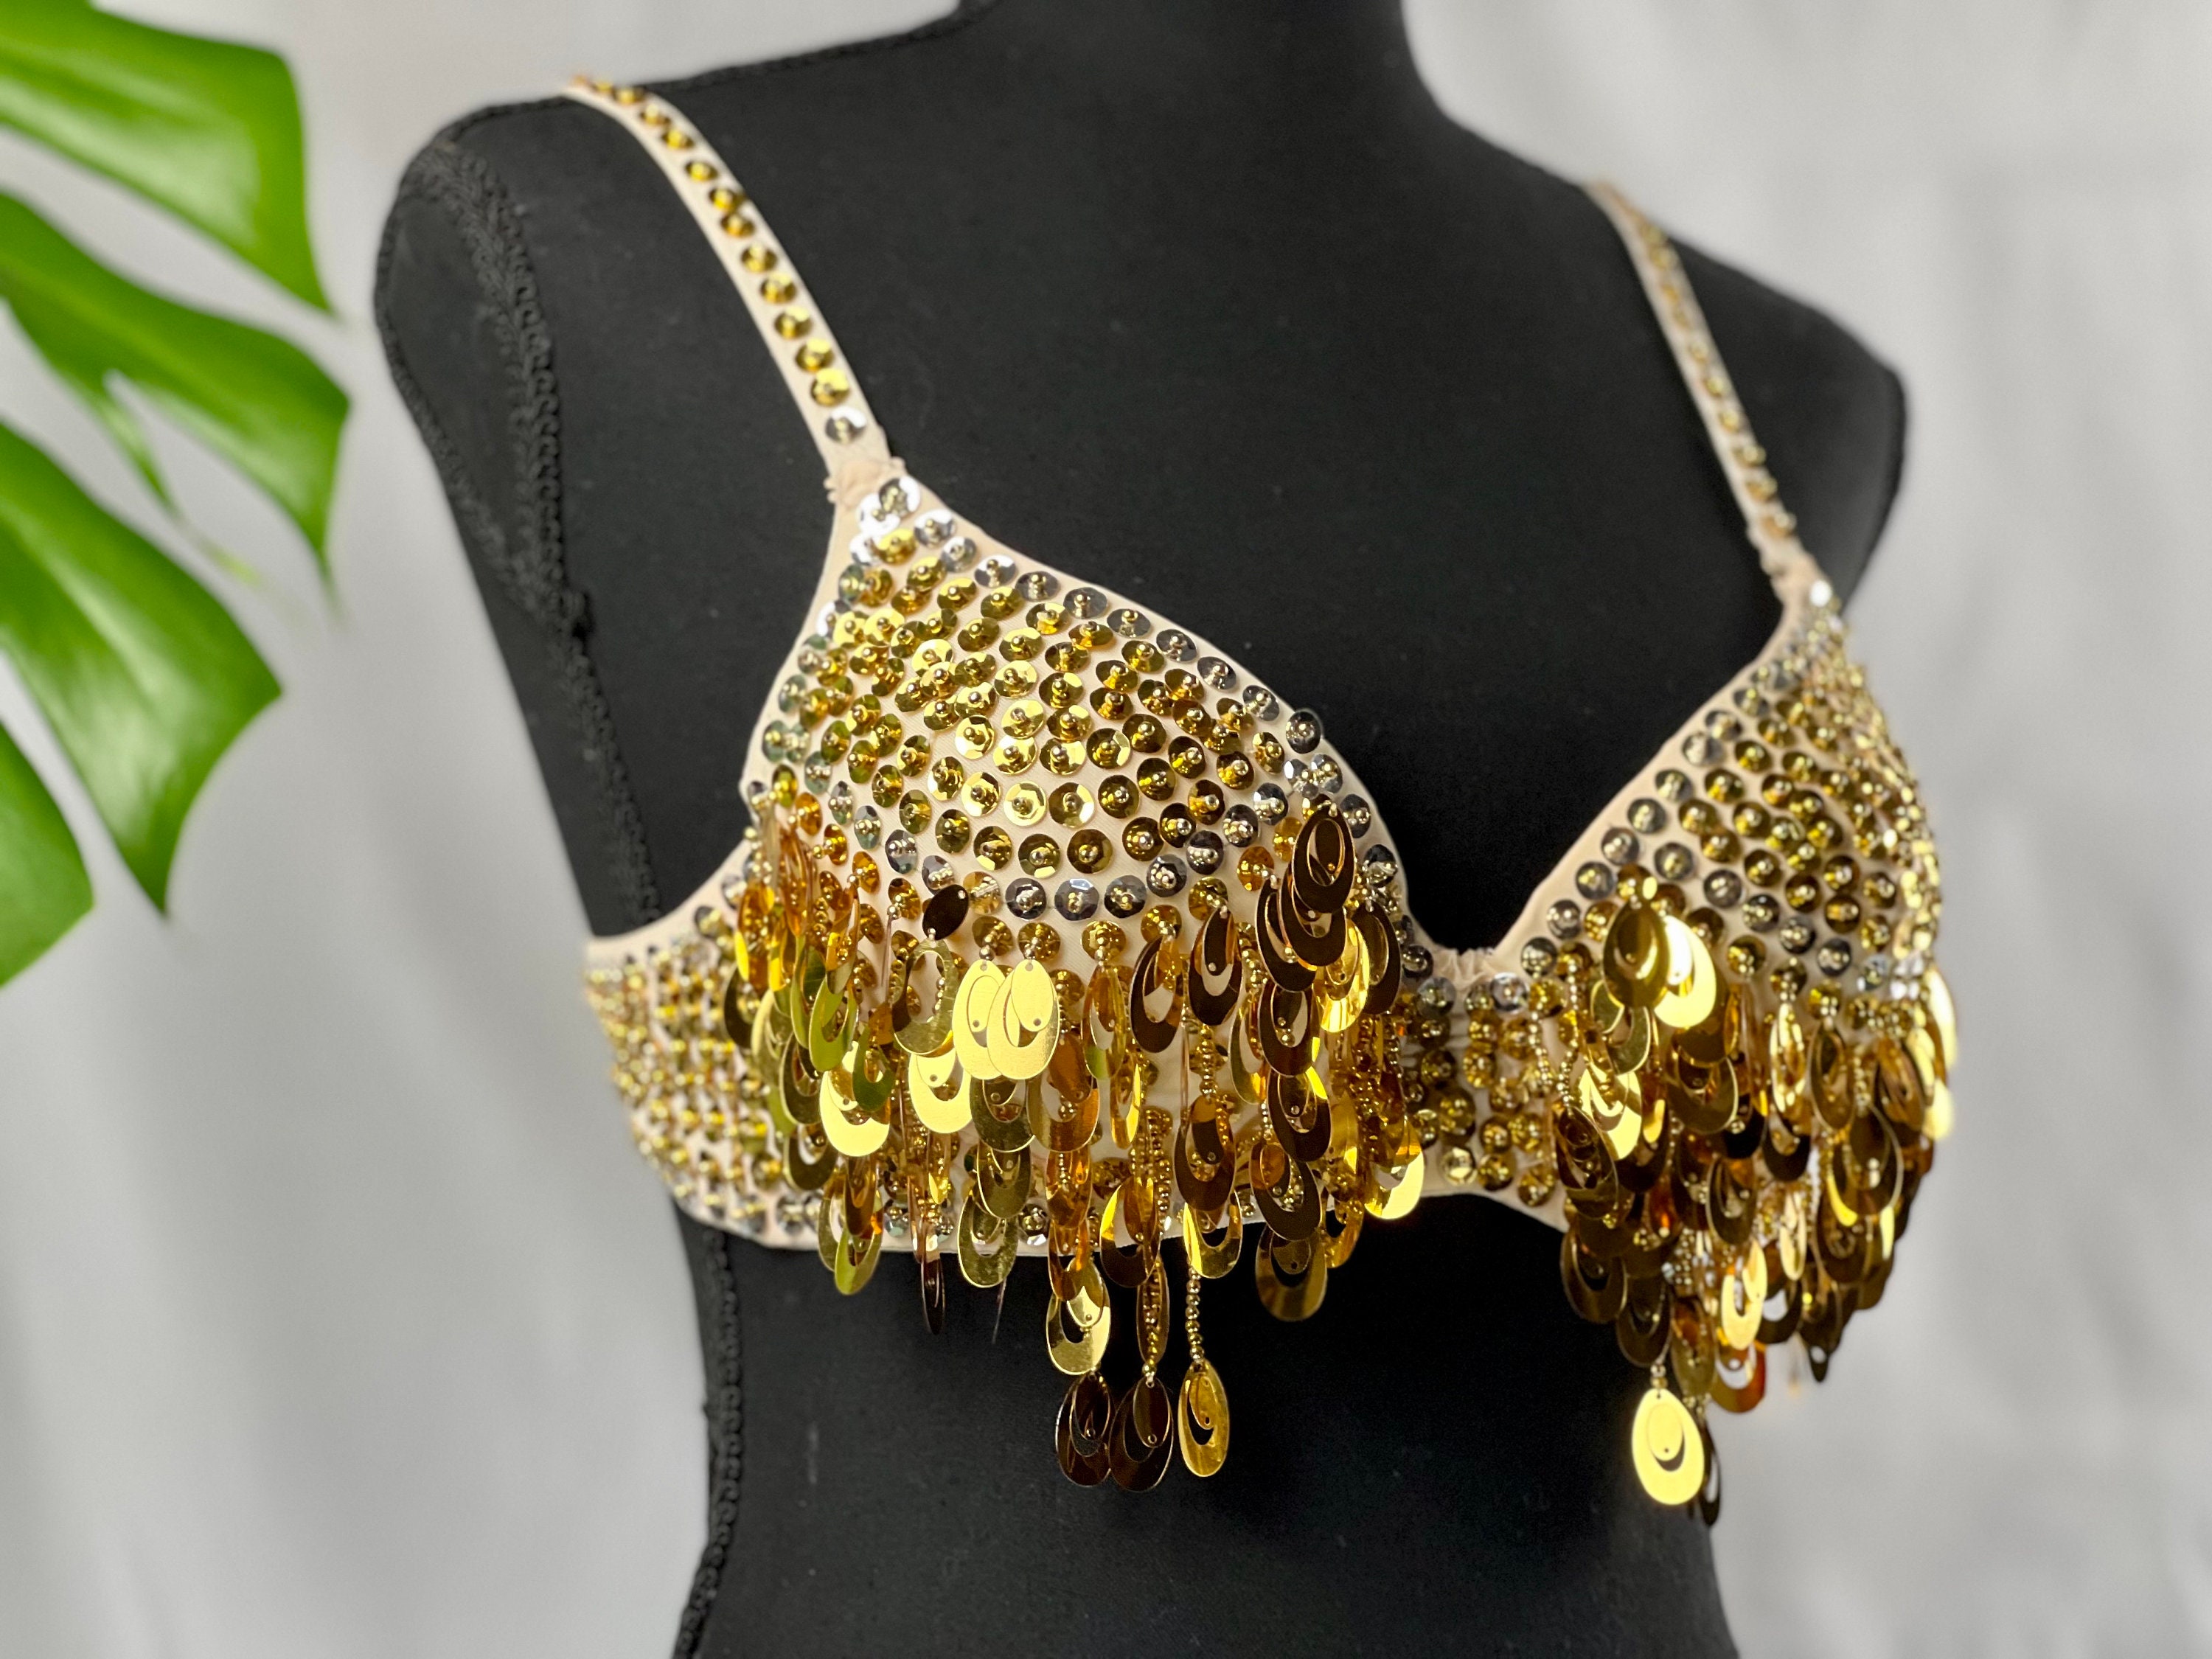 Made this bellydance set for my own performances: crown, bra, belt, skirt,  sleeves and some of the necklaces : r/crafts